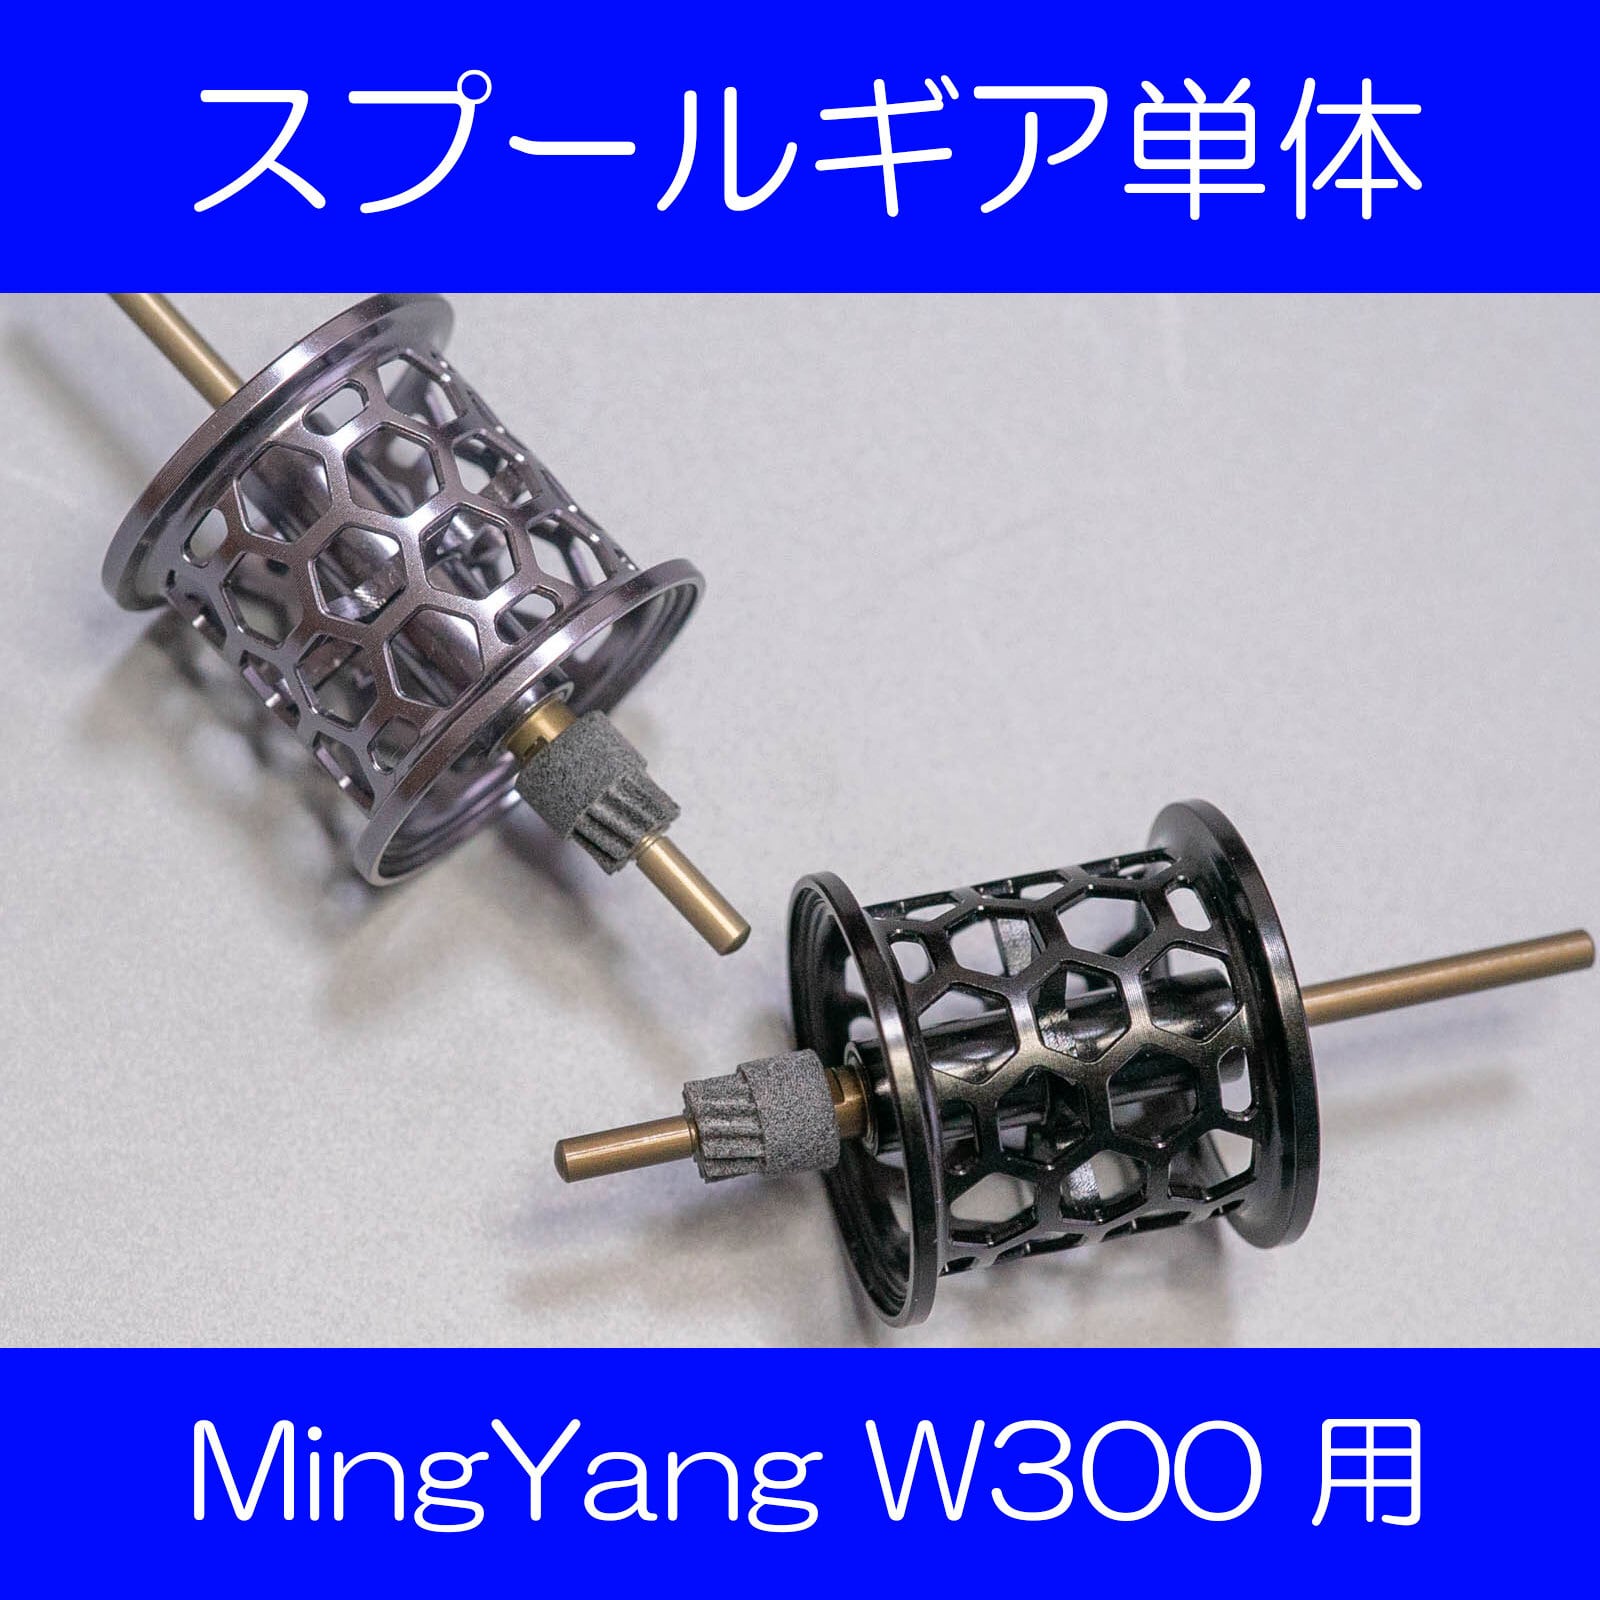 Newest Custom MingYang W300 After Modification And Custom Parts